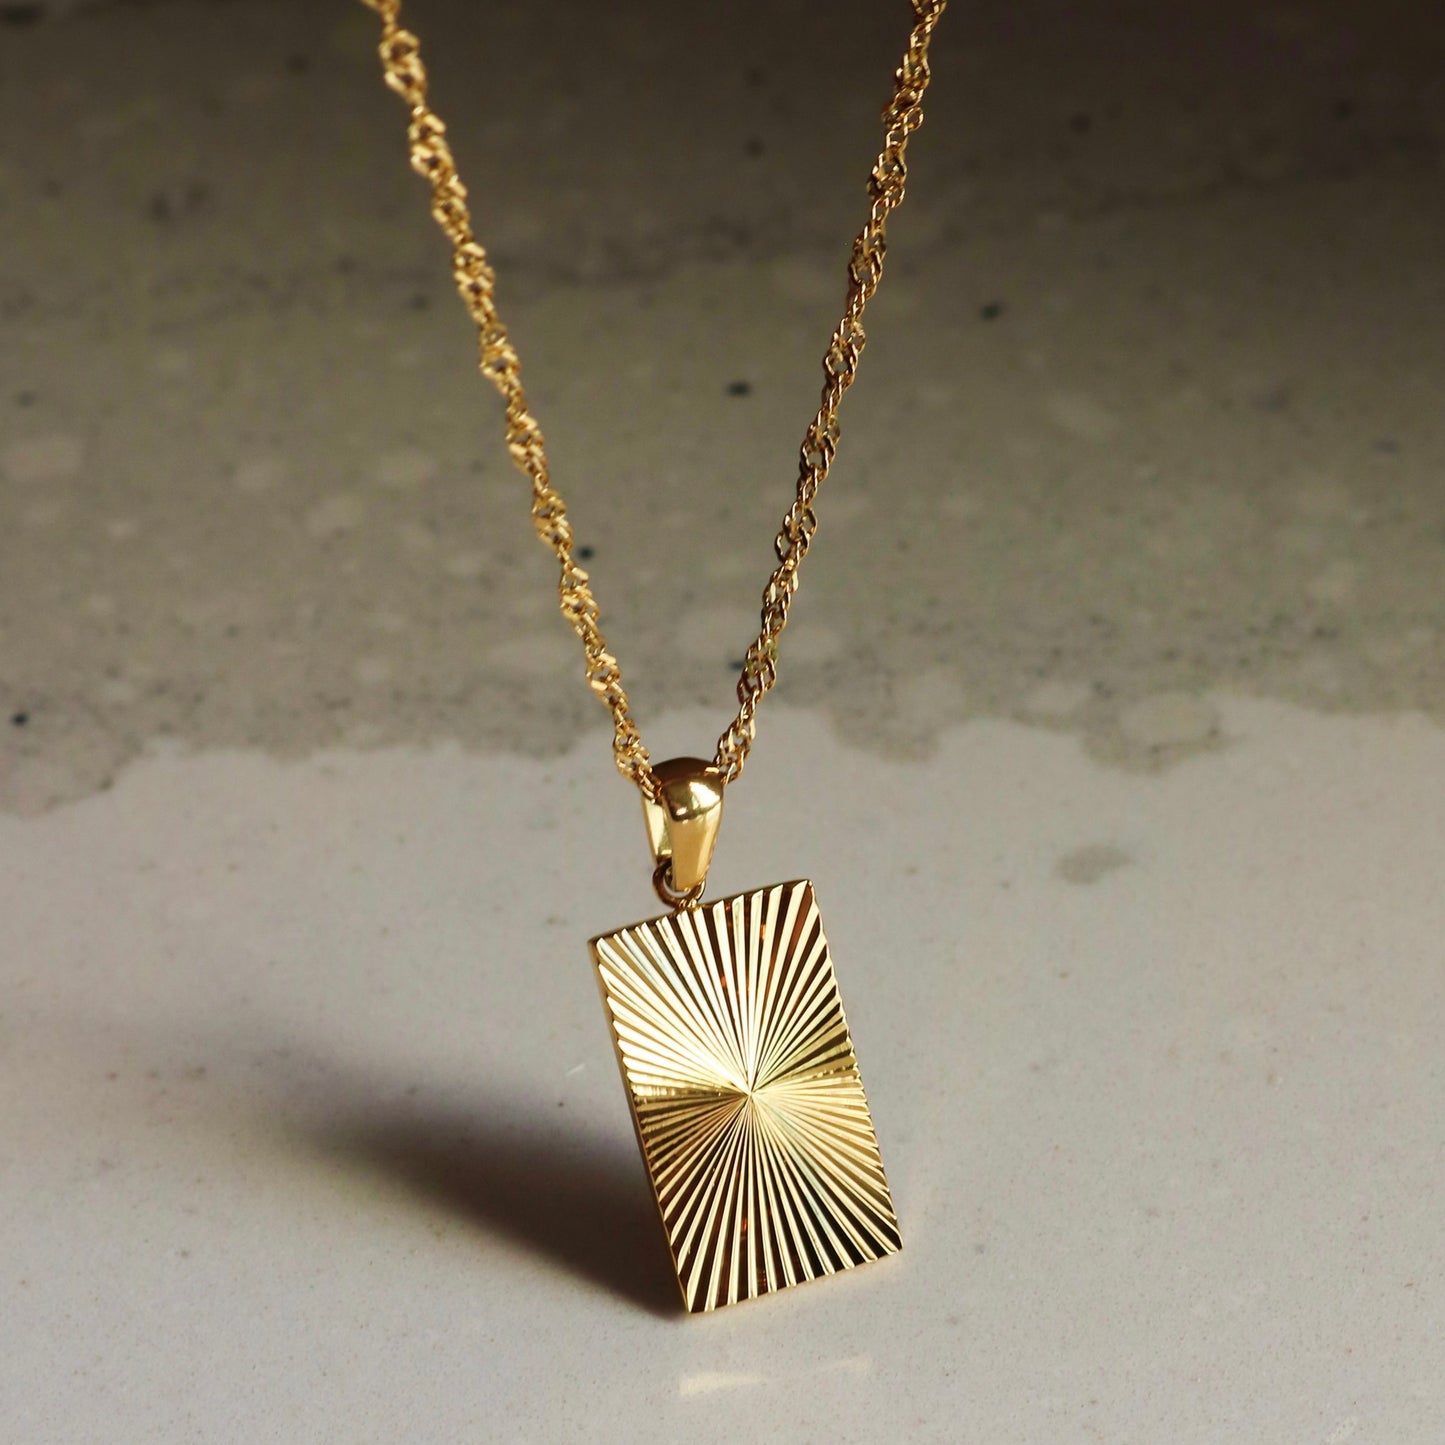 shiny gold necklace, gold great Gatsby necklace, gold square pendant